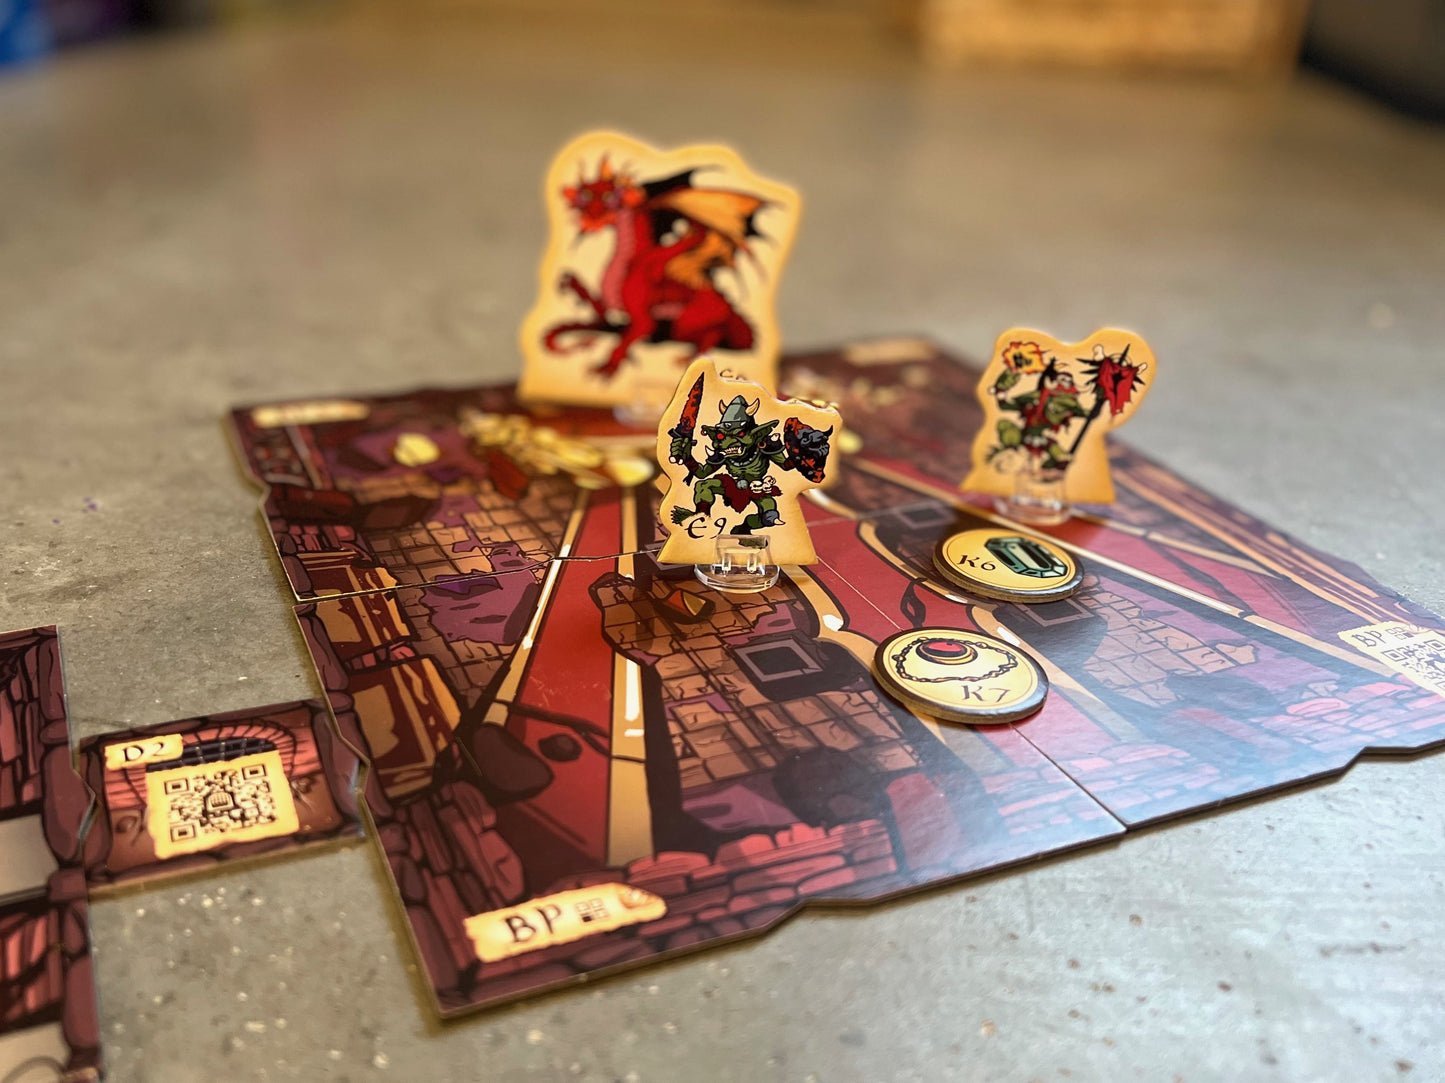 Taelmoor: The Scan and Play Dungeon Crawler Board Game